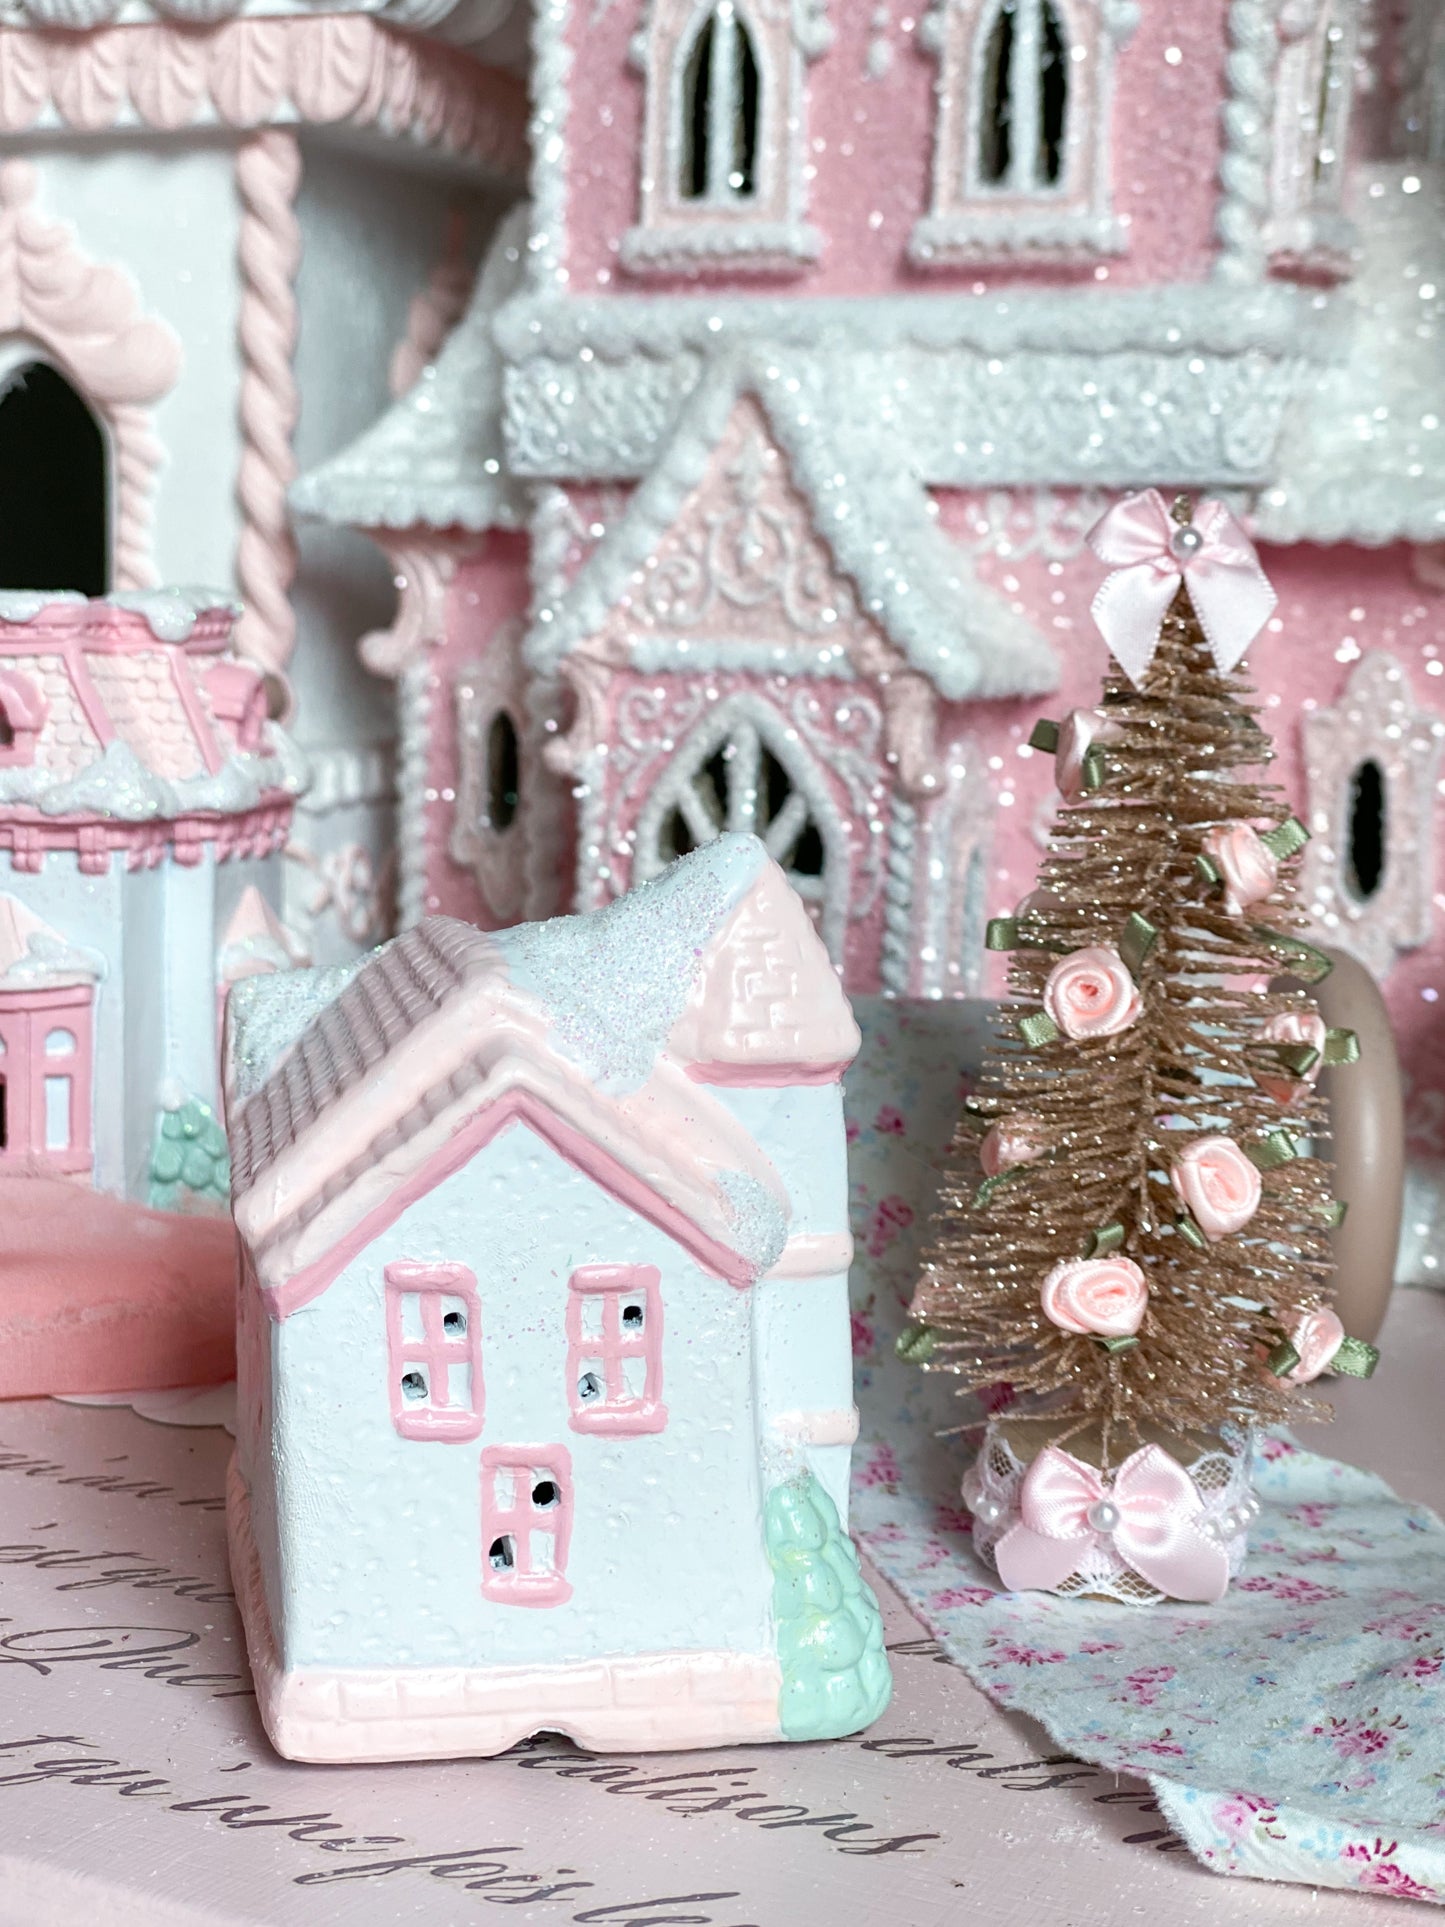 Bespoke Hand painted Pastel Pink and White Christmas Village Library PRE-ORDER